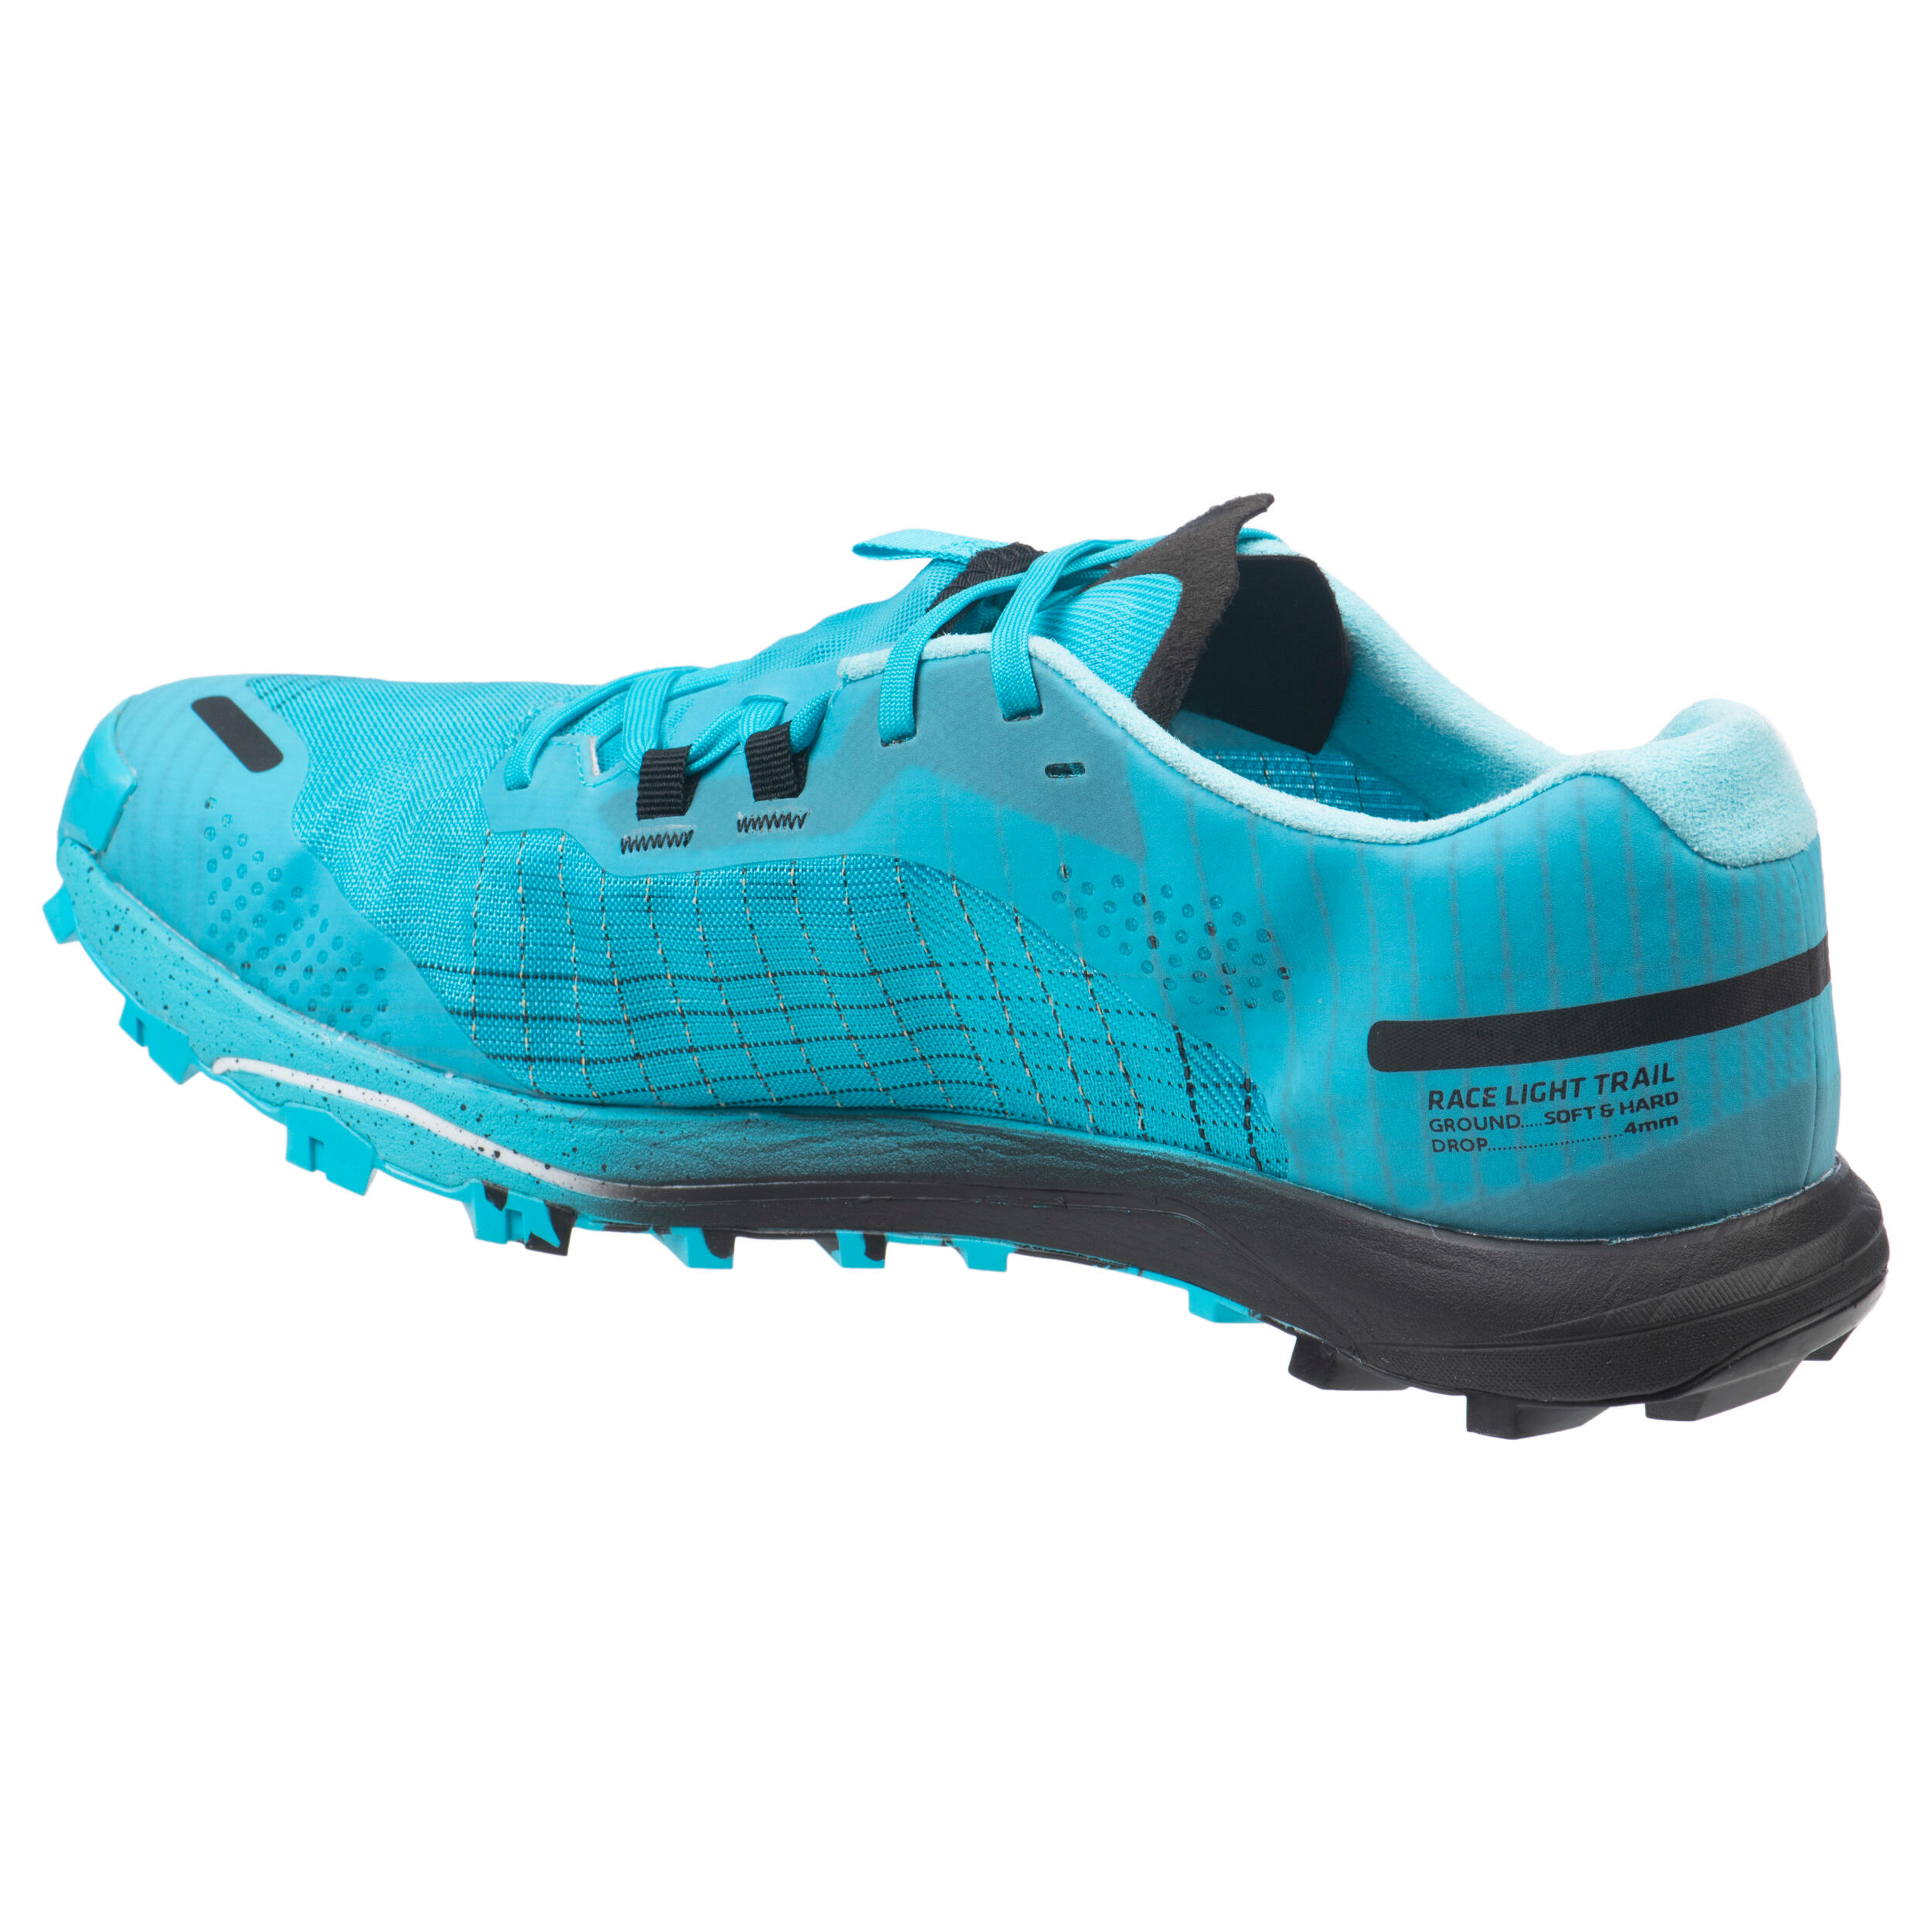 Race Light Men's Trail Running Shoes - sky blue and black 2/15